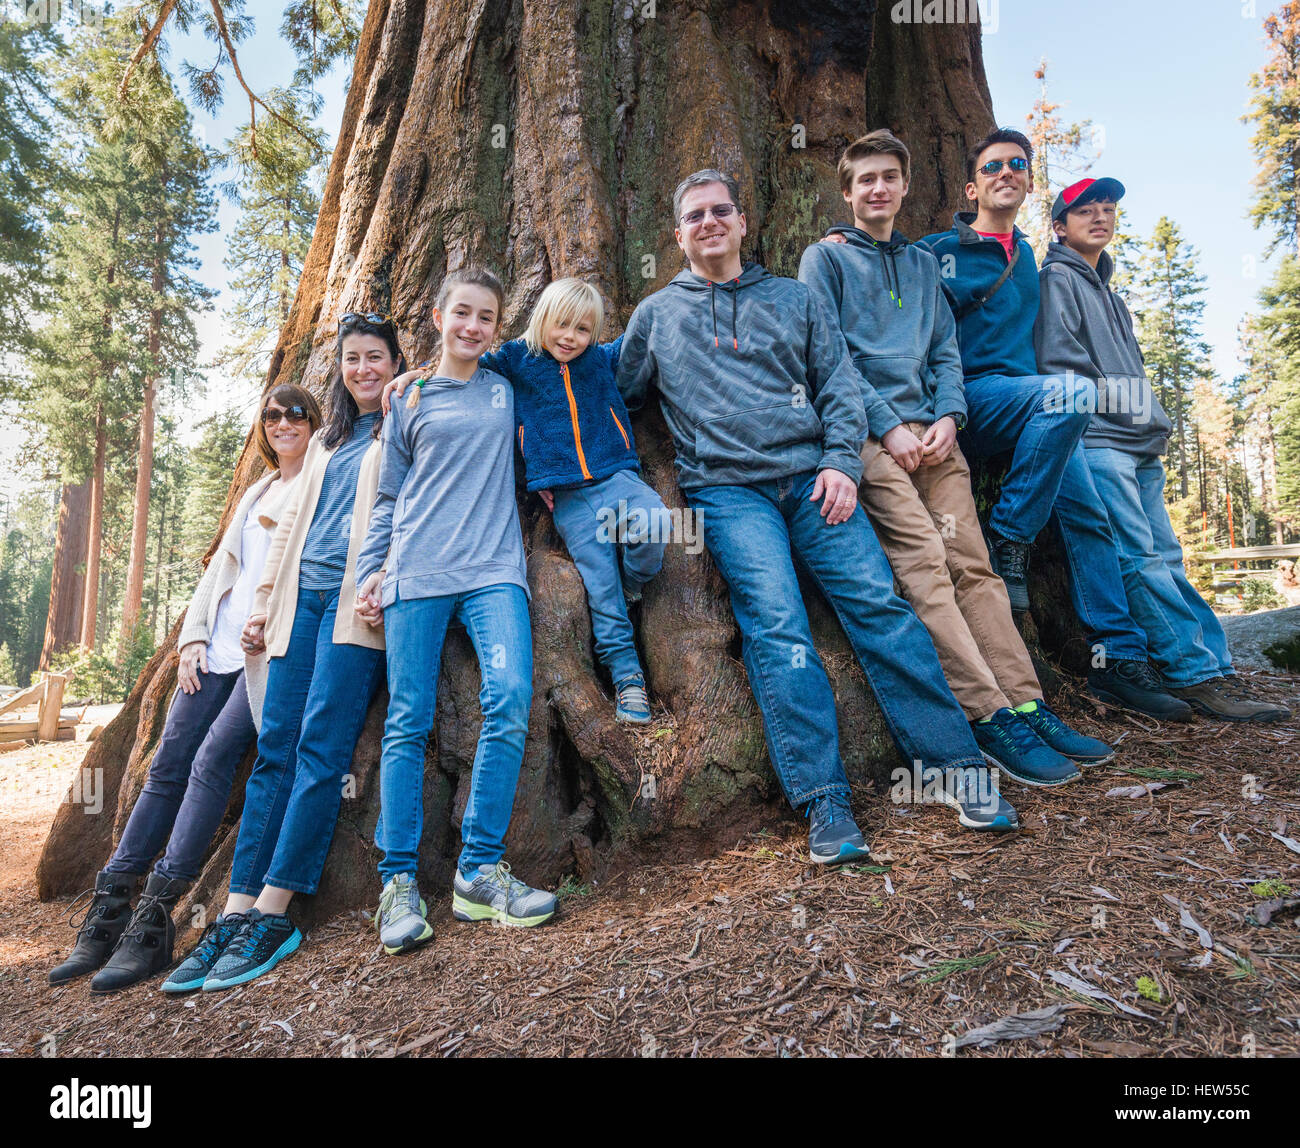 Portrait of group of people standing around large tree, Sequoia National Park, California, USA Stock Photo